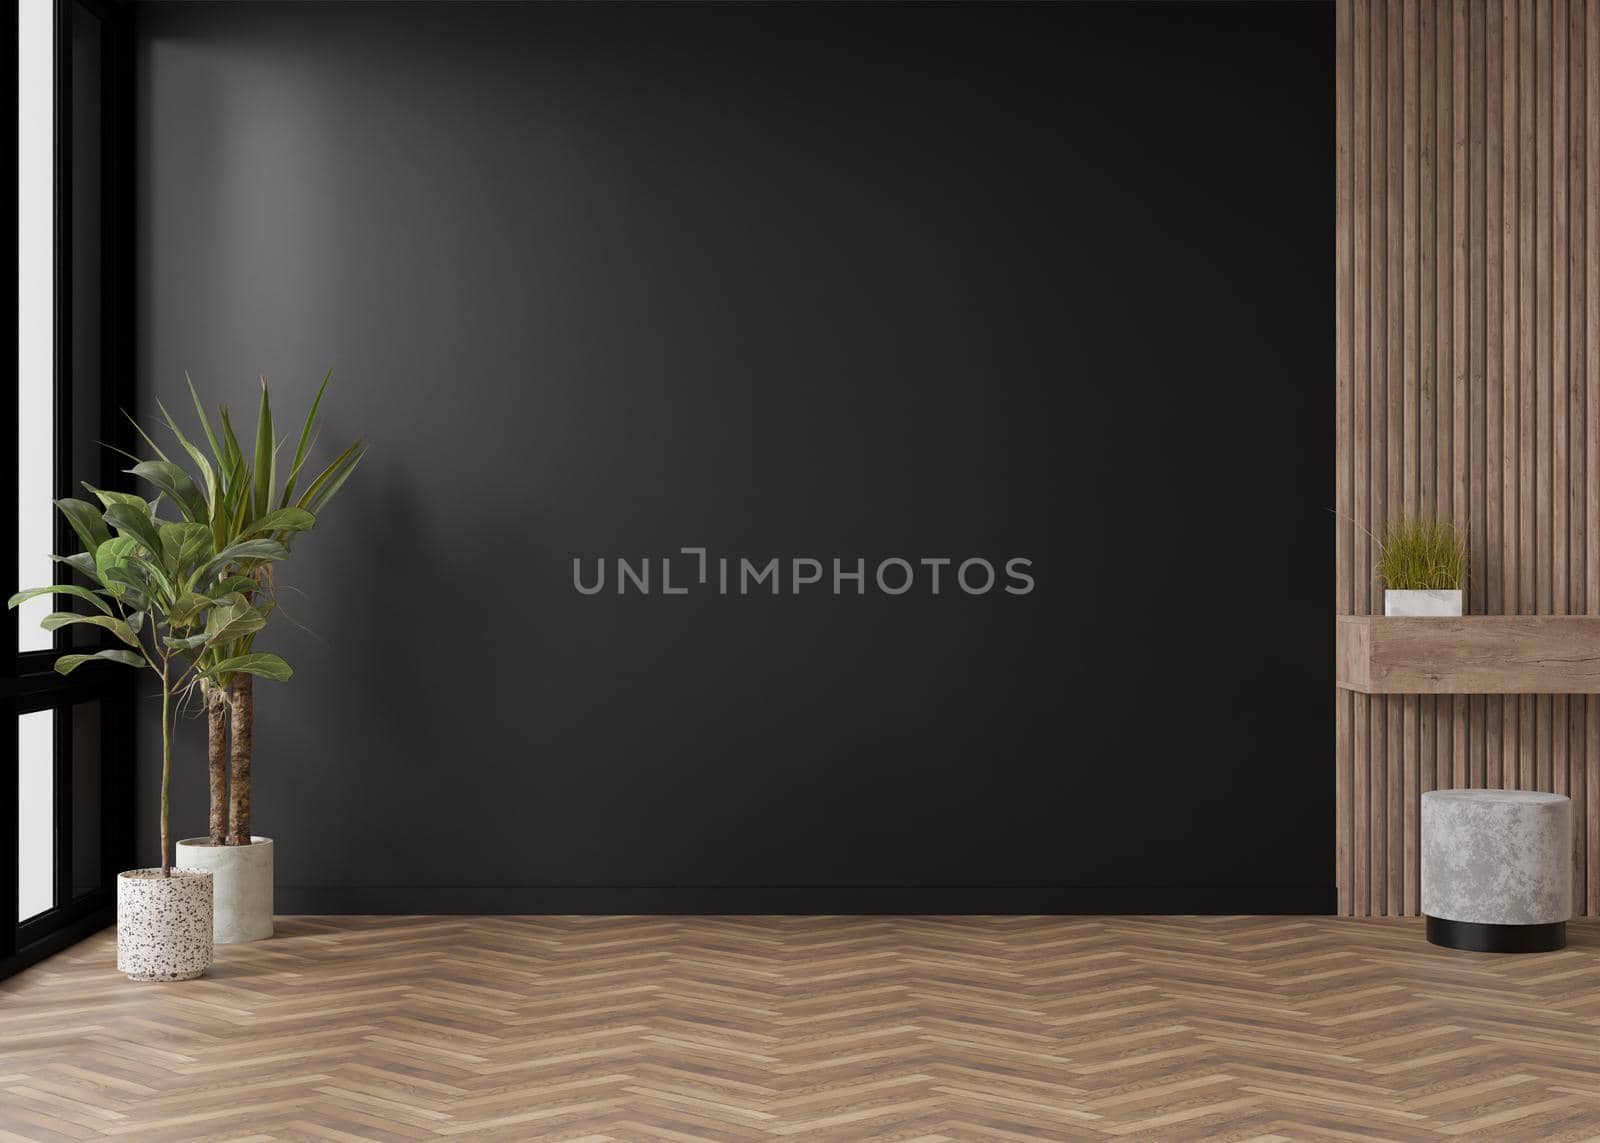 Empty room, black wall and parquet floor. Indoor plants. Mock up interior. Free, copy space for your furniture, picture and other objects. 3D rendering